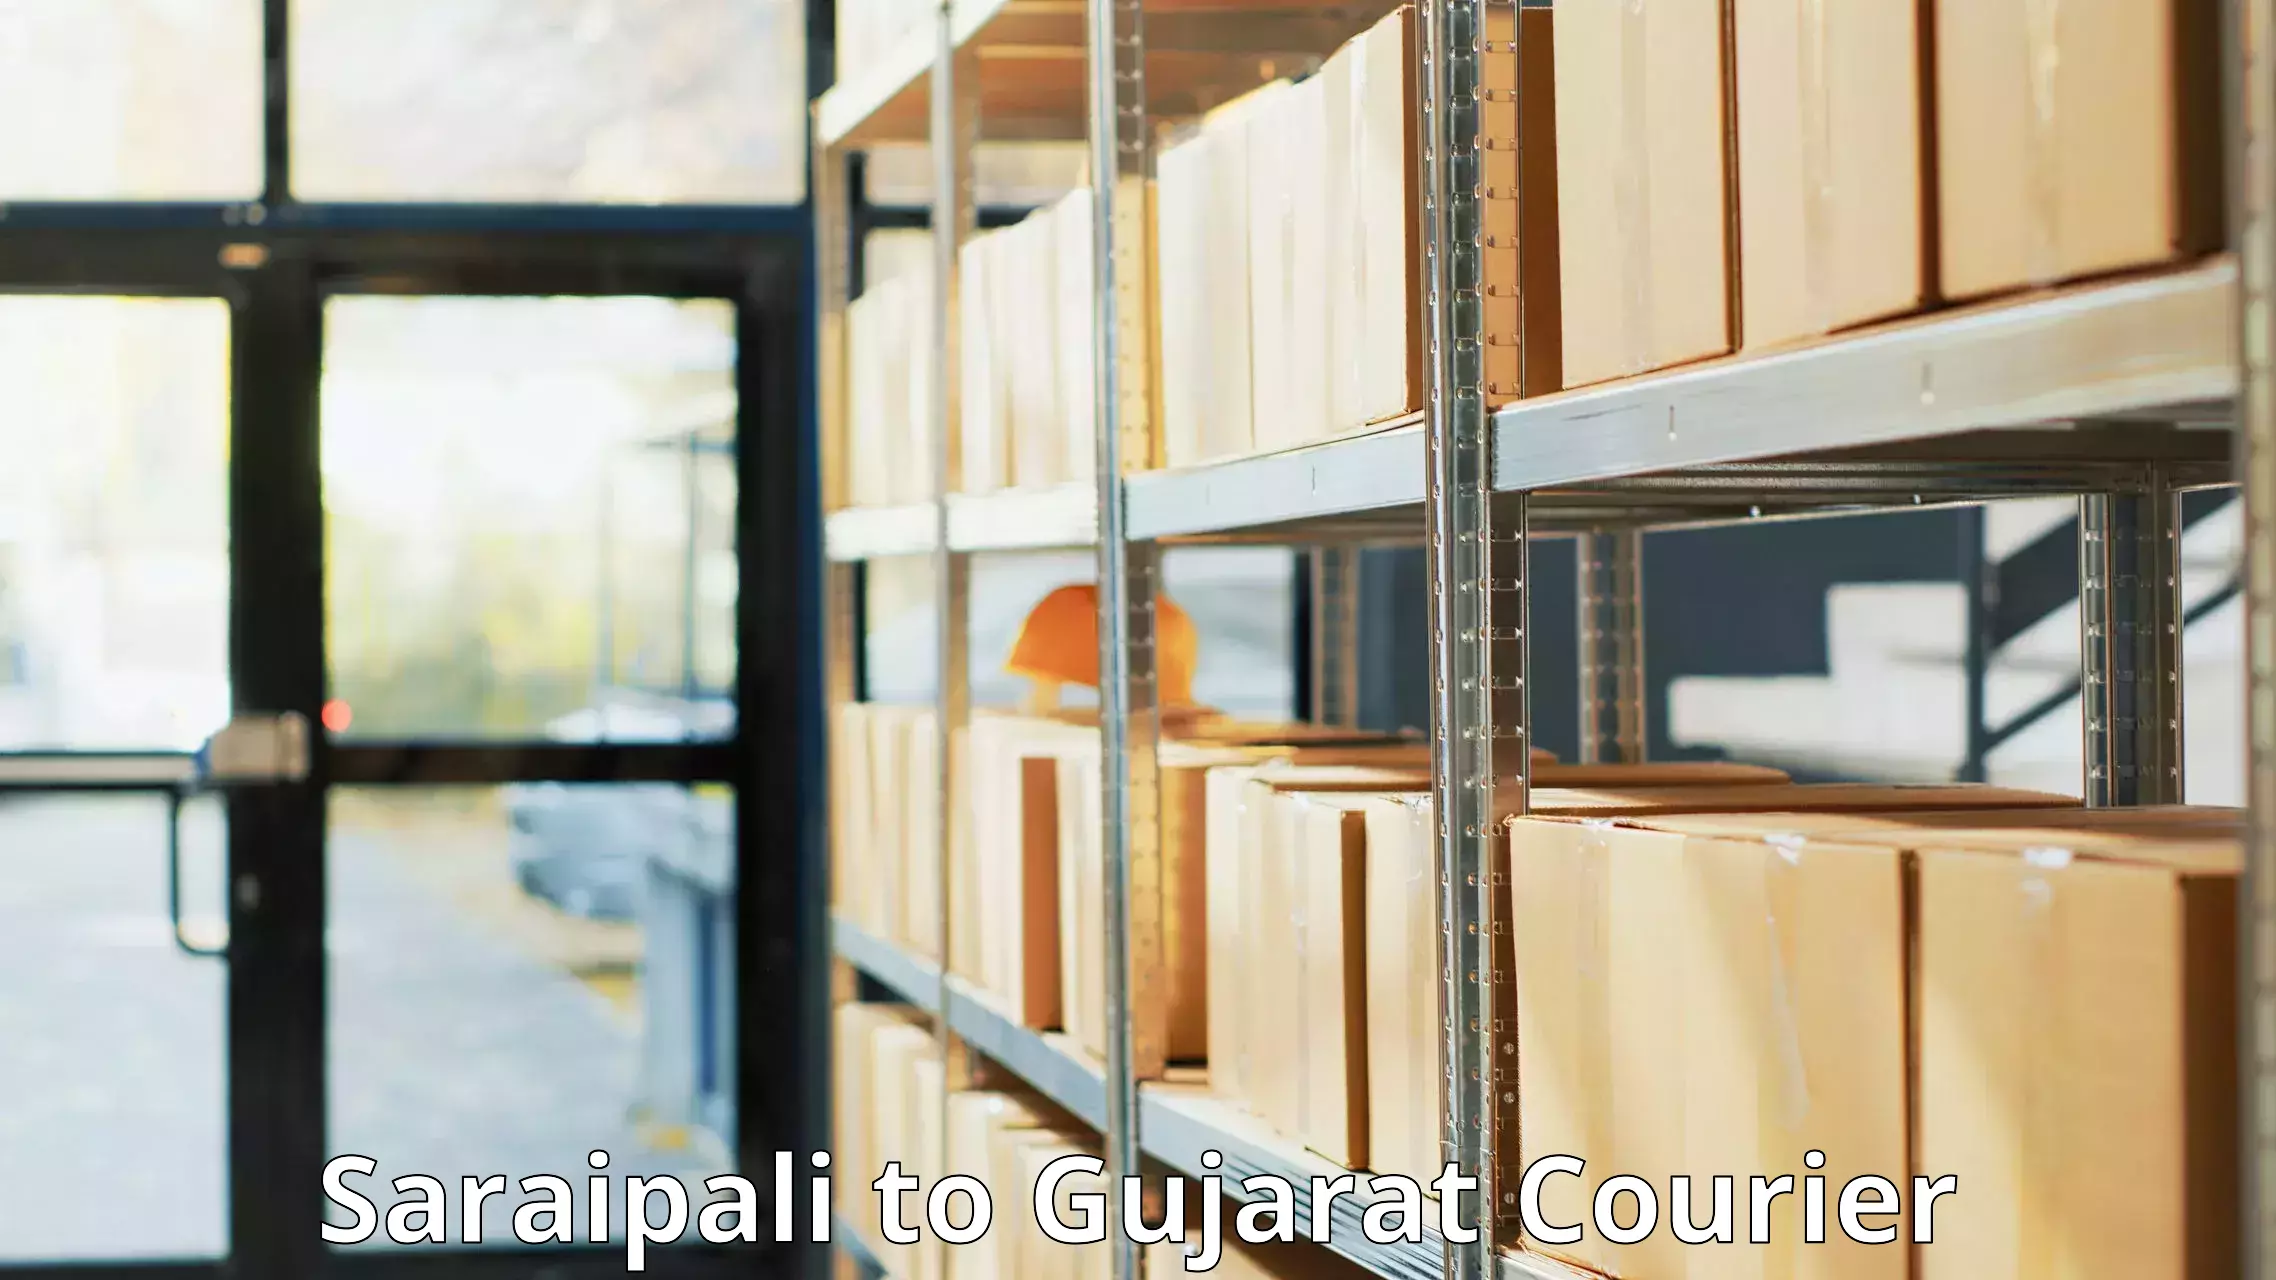 State-of-the-art courier technology in Saraipali to Jetpur